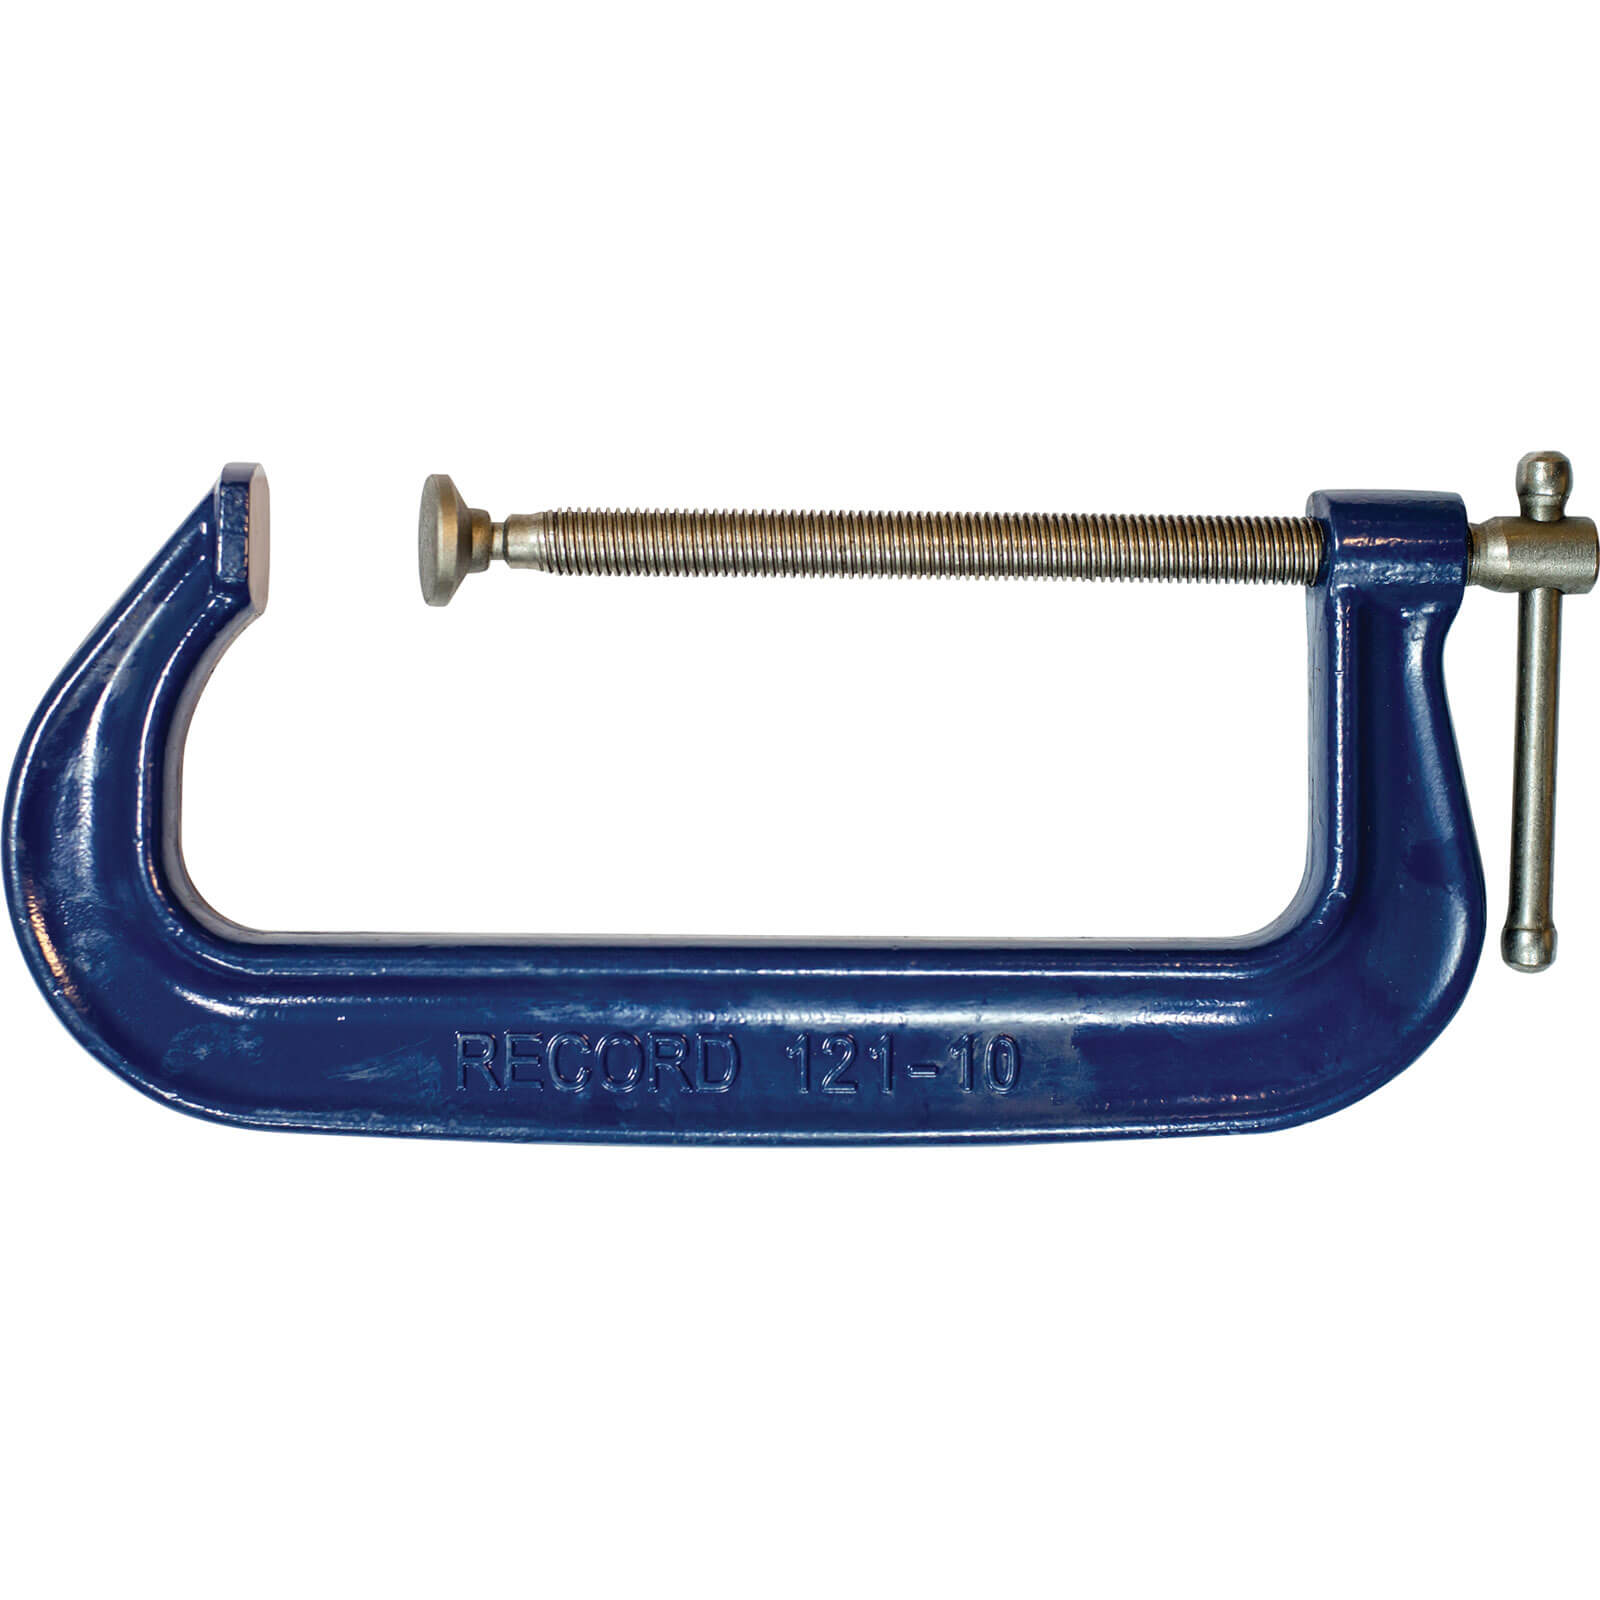 Image of Record 121 Heavy Duty G Clamp 250mm